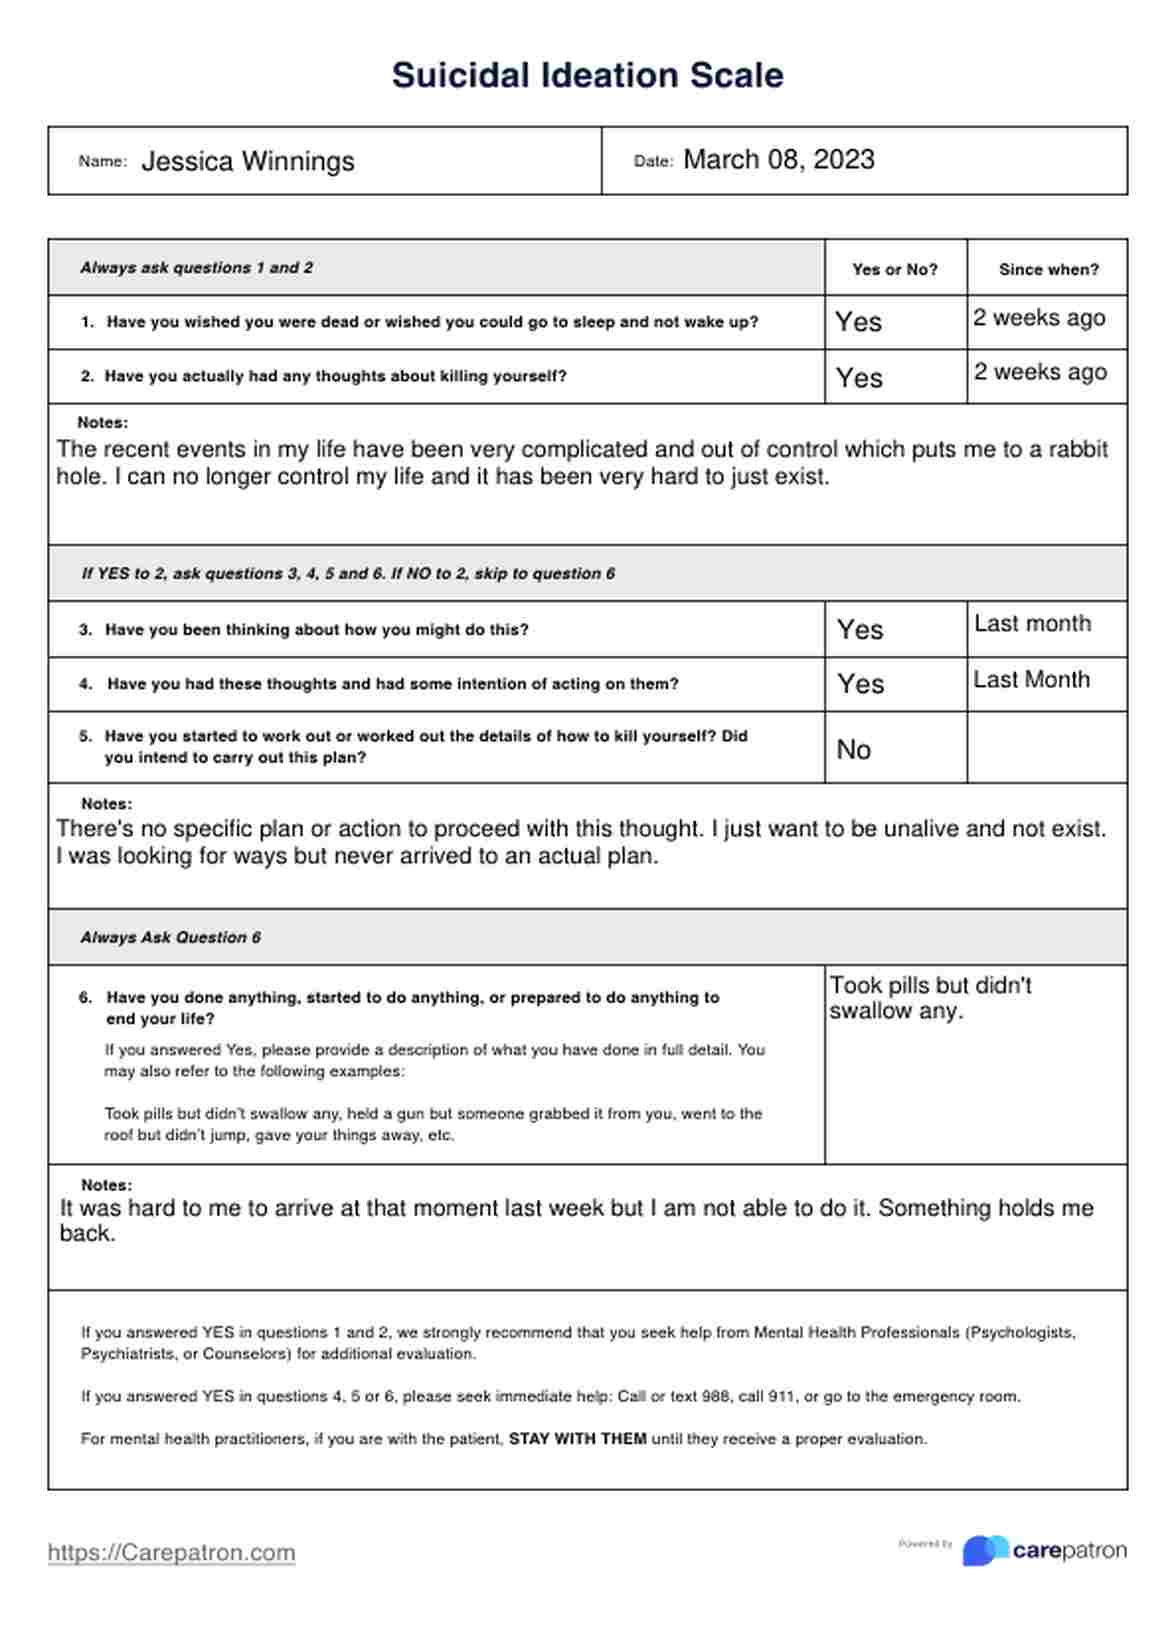 Suicidal Ideation Scales PDF Example